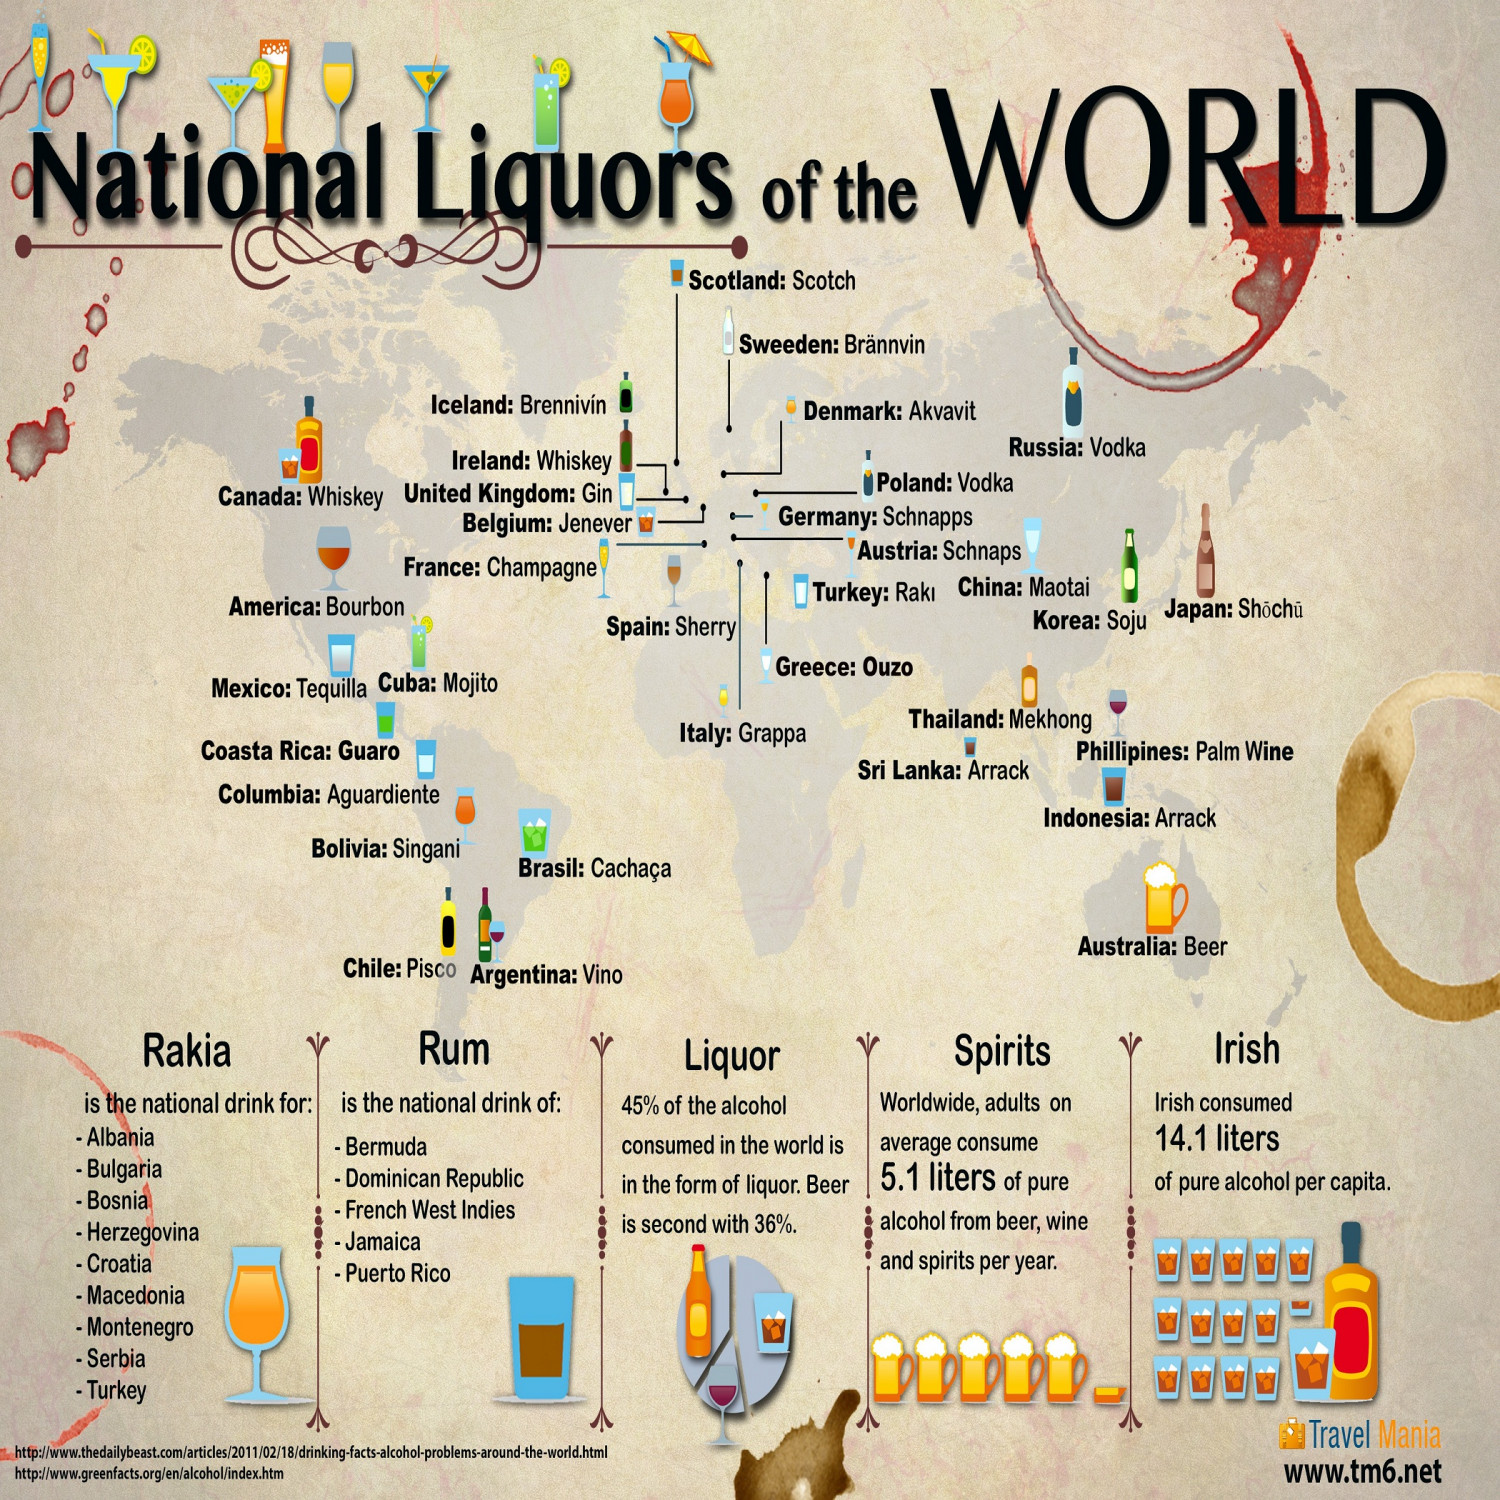 National Liquors of the World Infographic